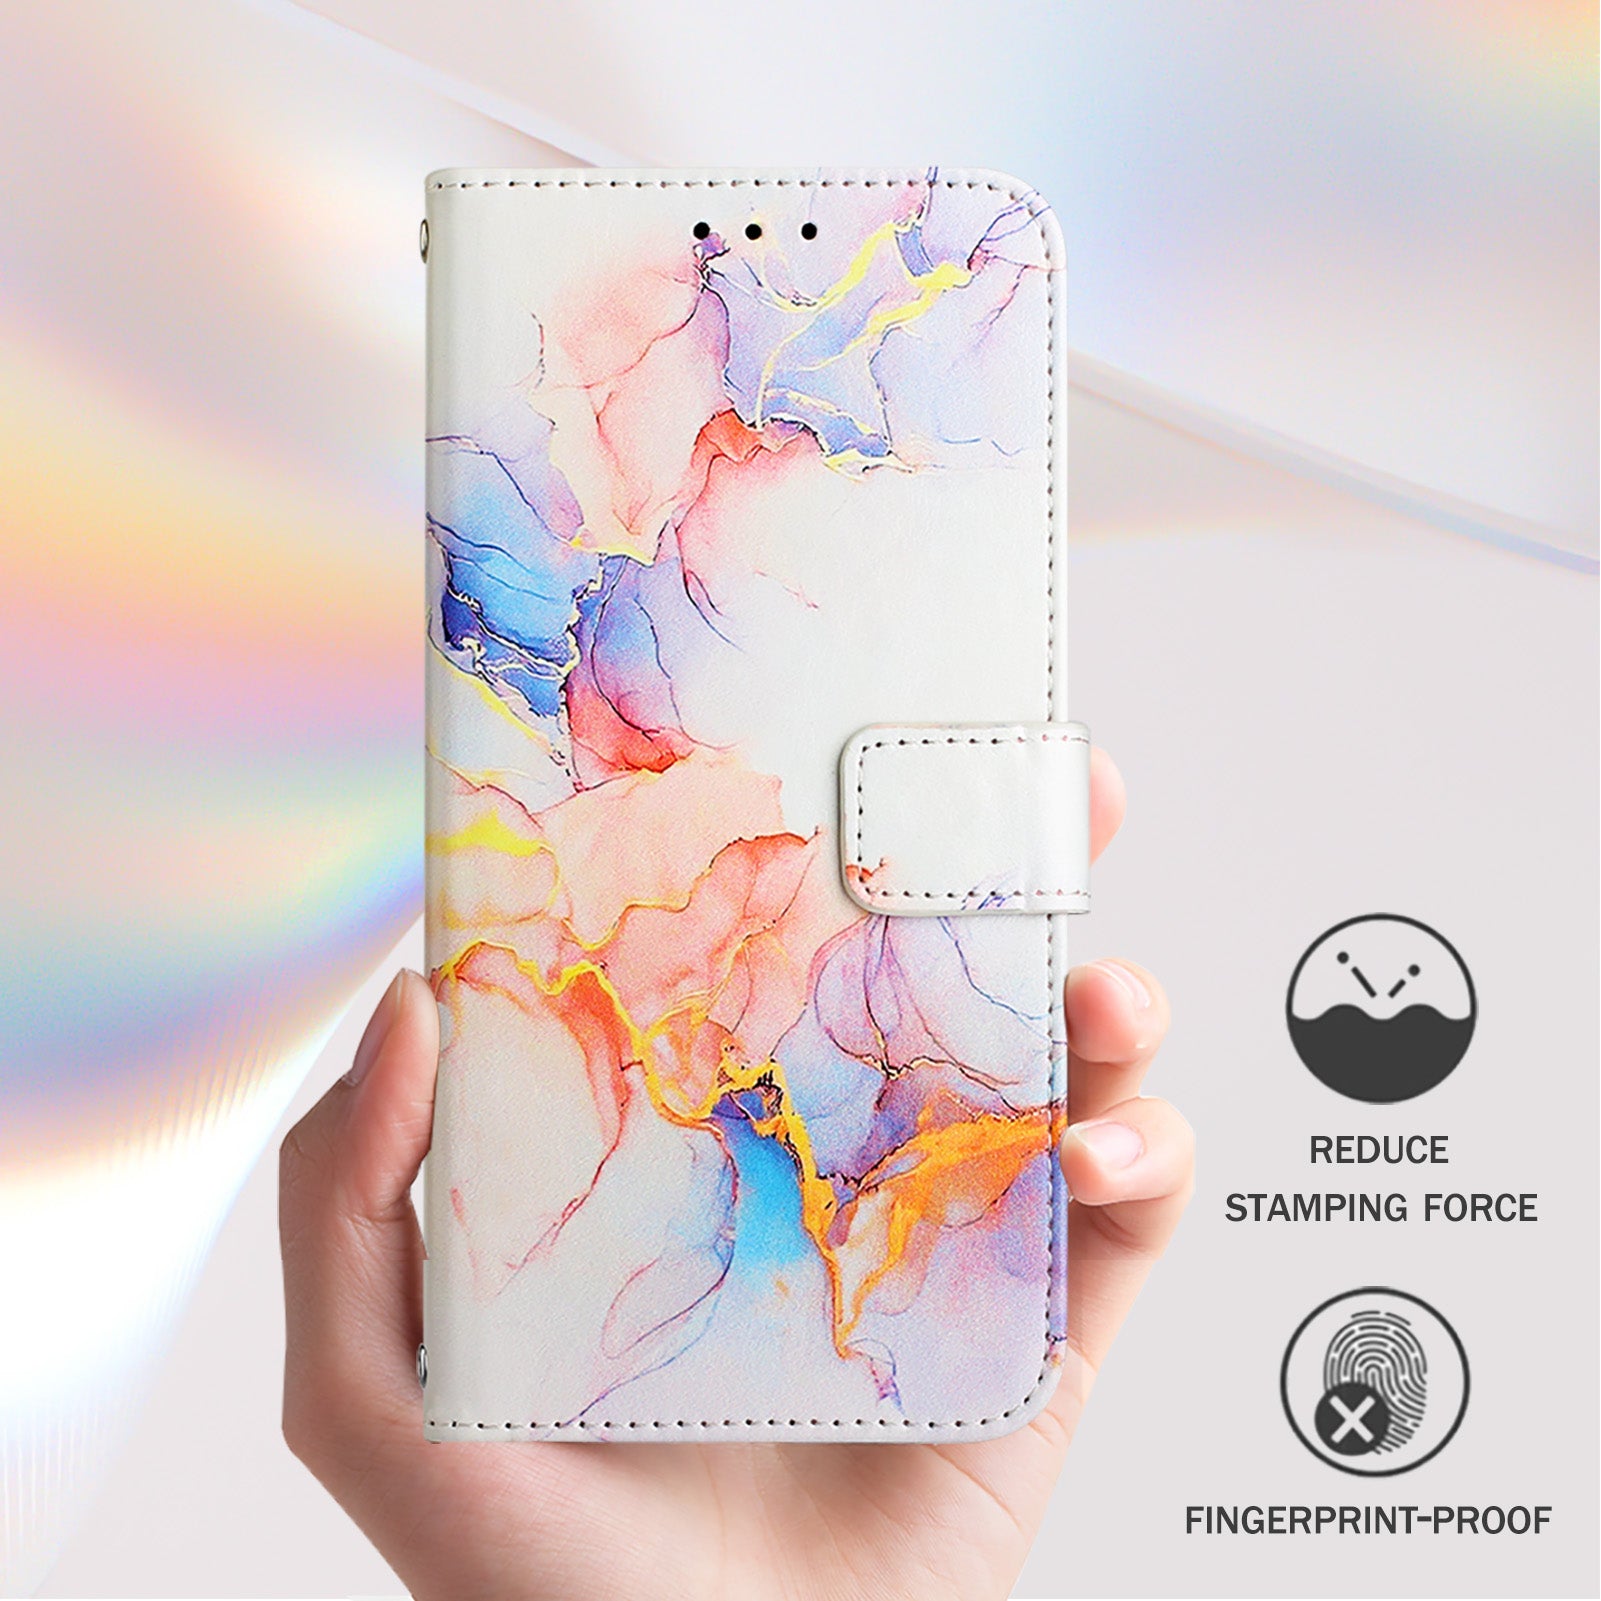 YB Pattern Printing Leather Series-6 For OnePlus Nord CE4 5G Case Stand Flip Phone Cover with Shoulder Strap - Milky Way Marble White LS004